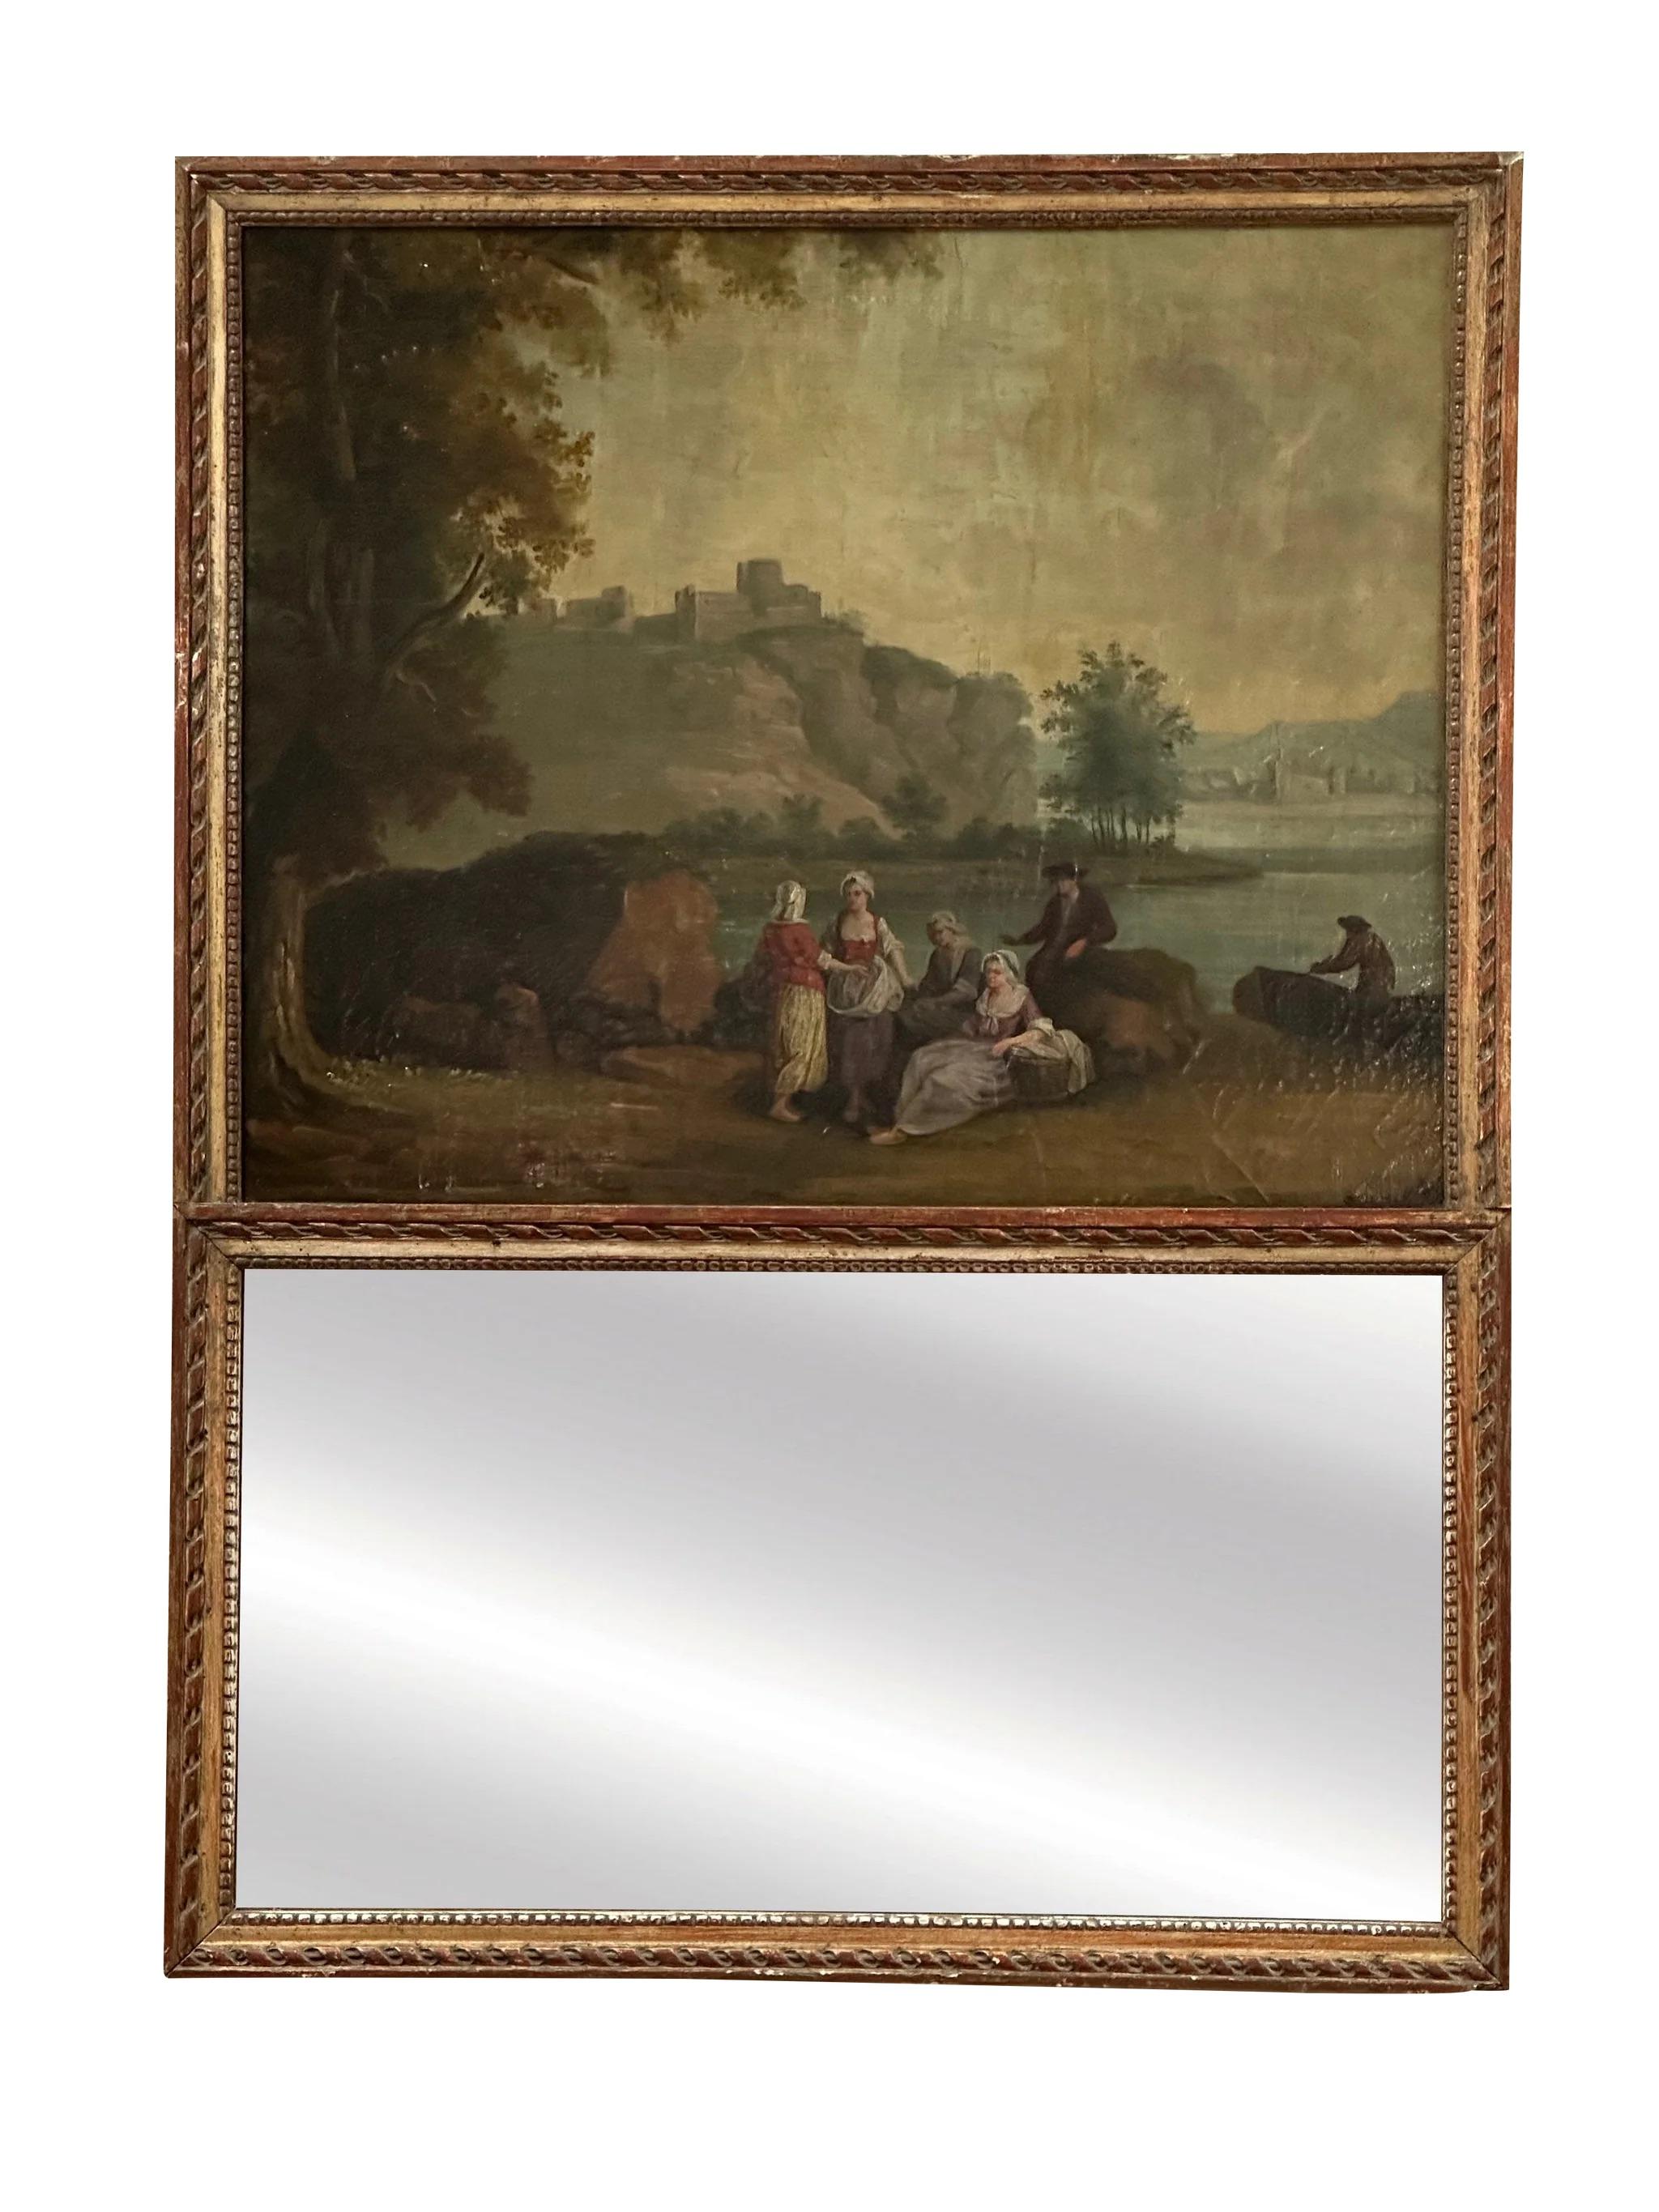 Glass 18th-19th Century French Trumeau Mirror, Manner of Vernet